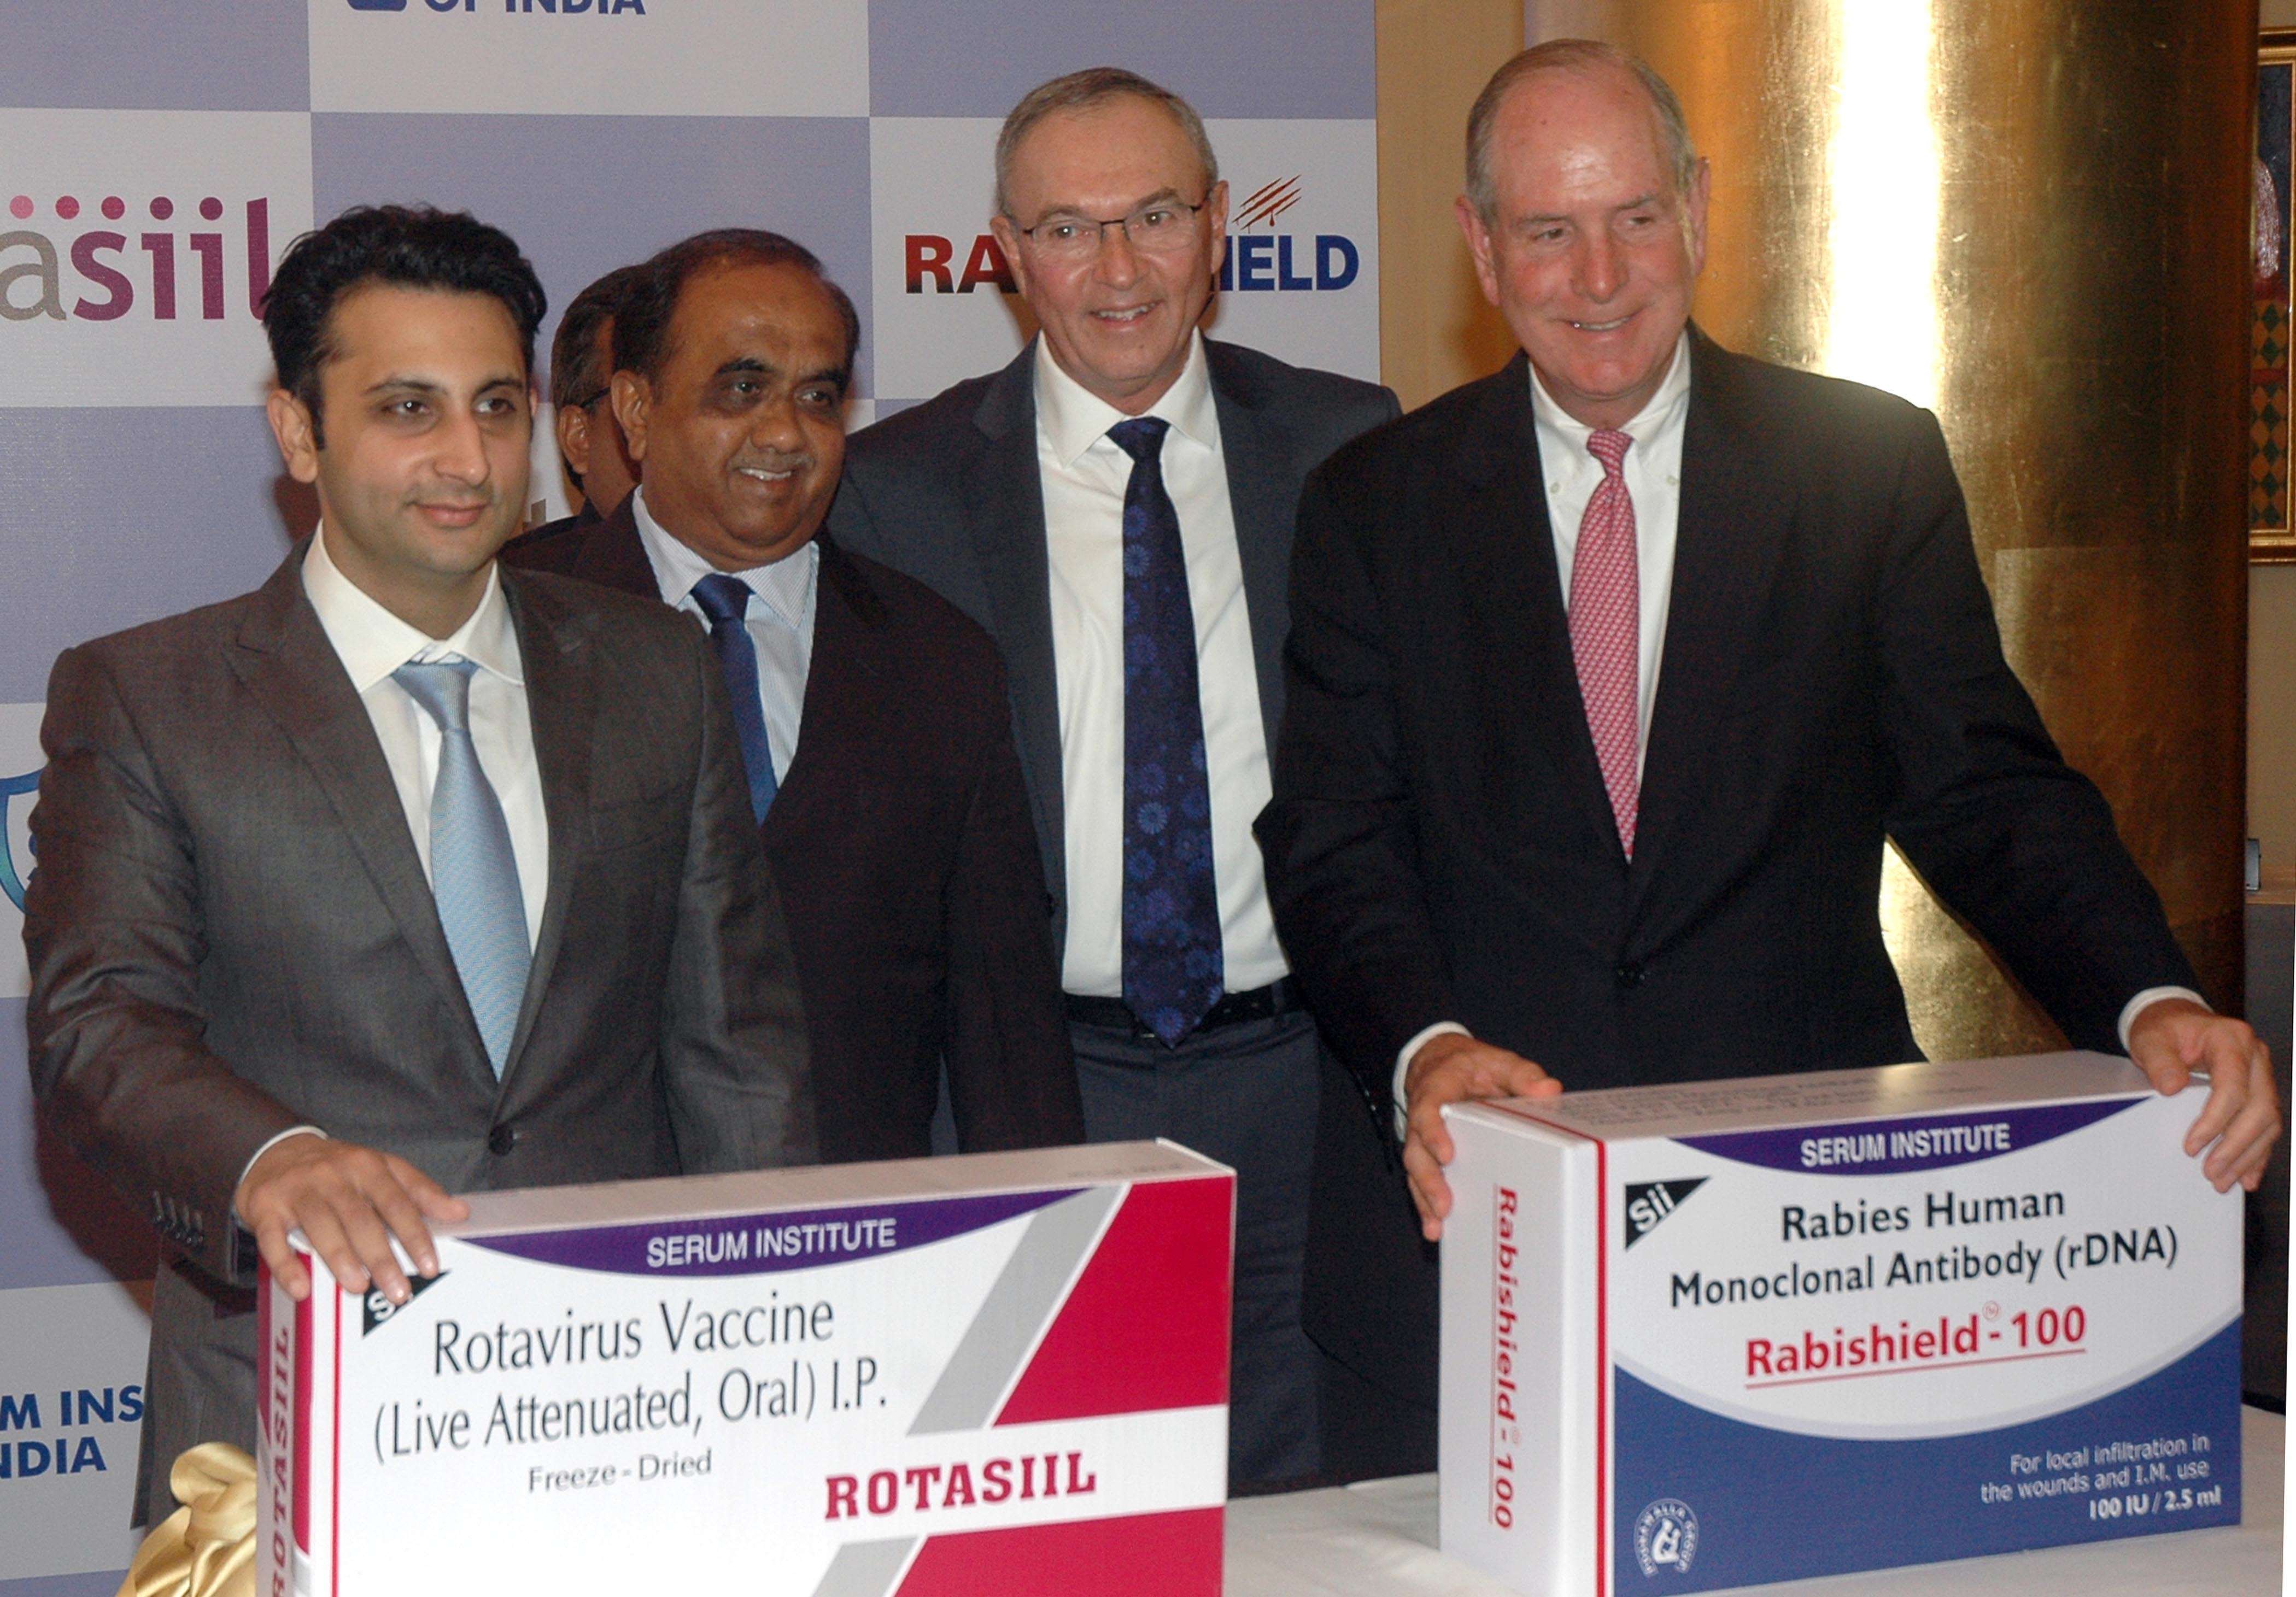 Mumbai : Adar Poonawalla, CEO of Serum Institute of India with Michael Collins, MD Chancellor, University of Massachusetts Medical School (R) and Mark Klempner ,MD Executive, VC Mass Biologic, Professor of Medicicine, University of Massachusetts Medical School and Dr Rajeev Dhere during the event of Serum Institiute of India unveiling advanced Rotasiil vaccine and Rabishied monoclonal antibody globally ~developed in partnership with Massachusettd Medical School, USA in Mumbai on Tuesday. Photo By Sachin Murdeshwar GPN NETWORK